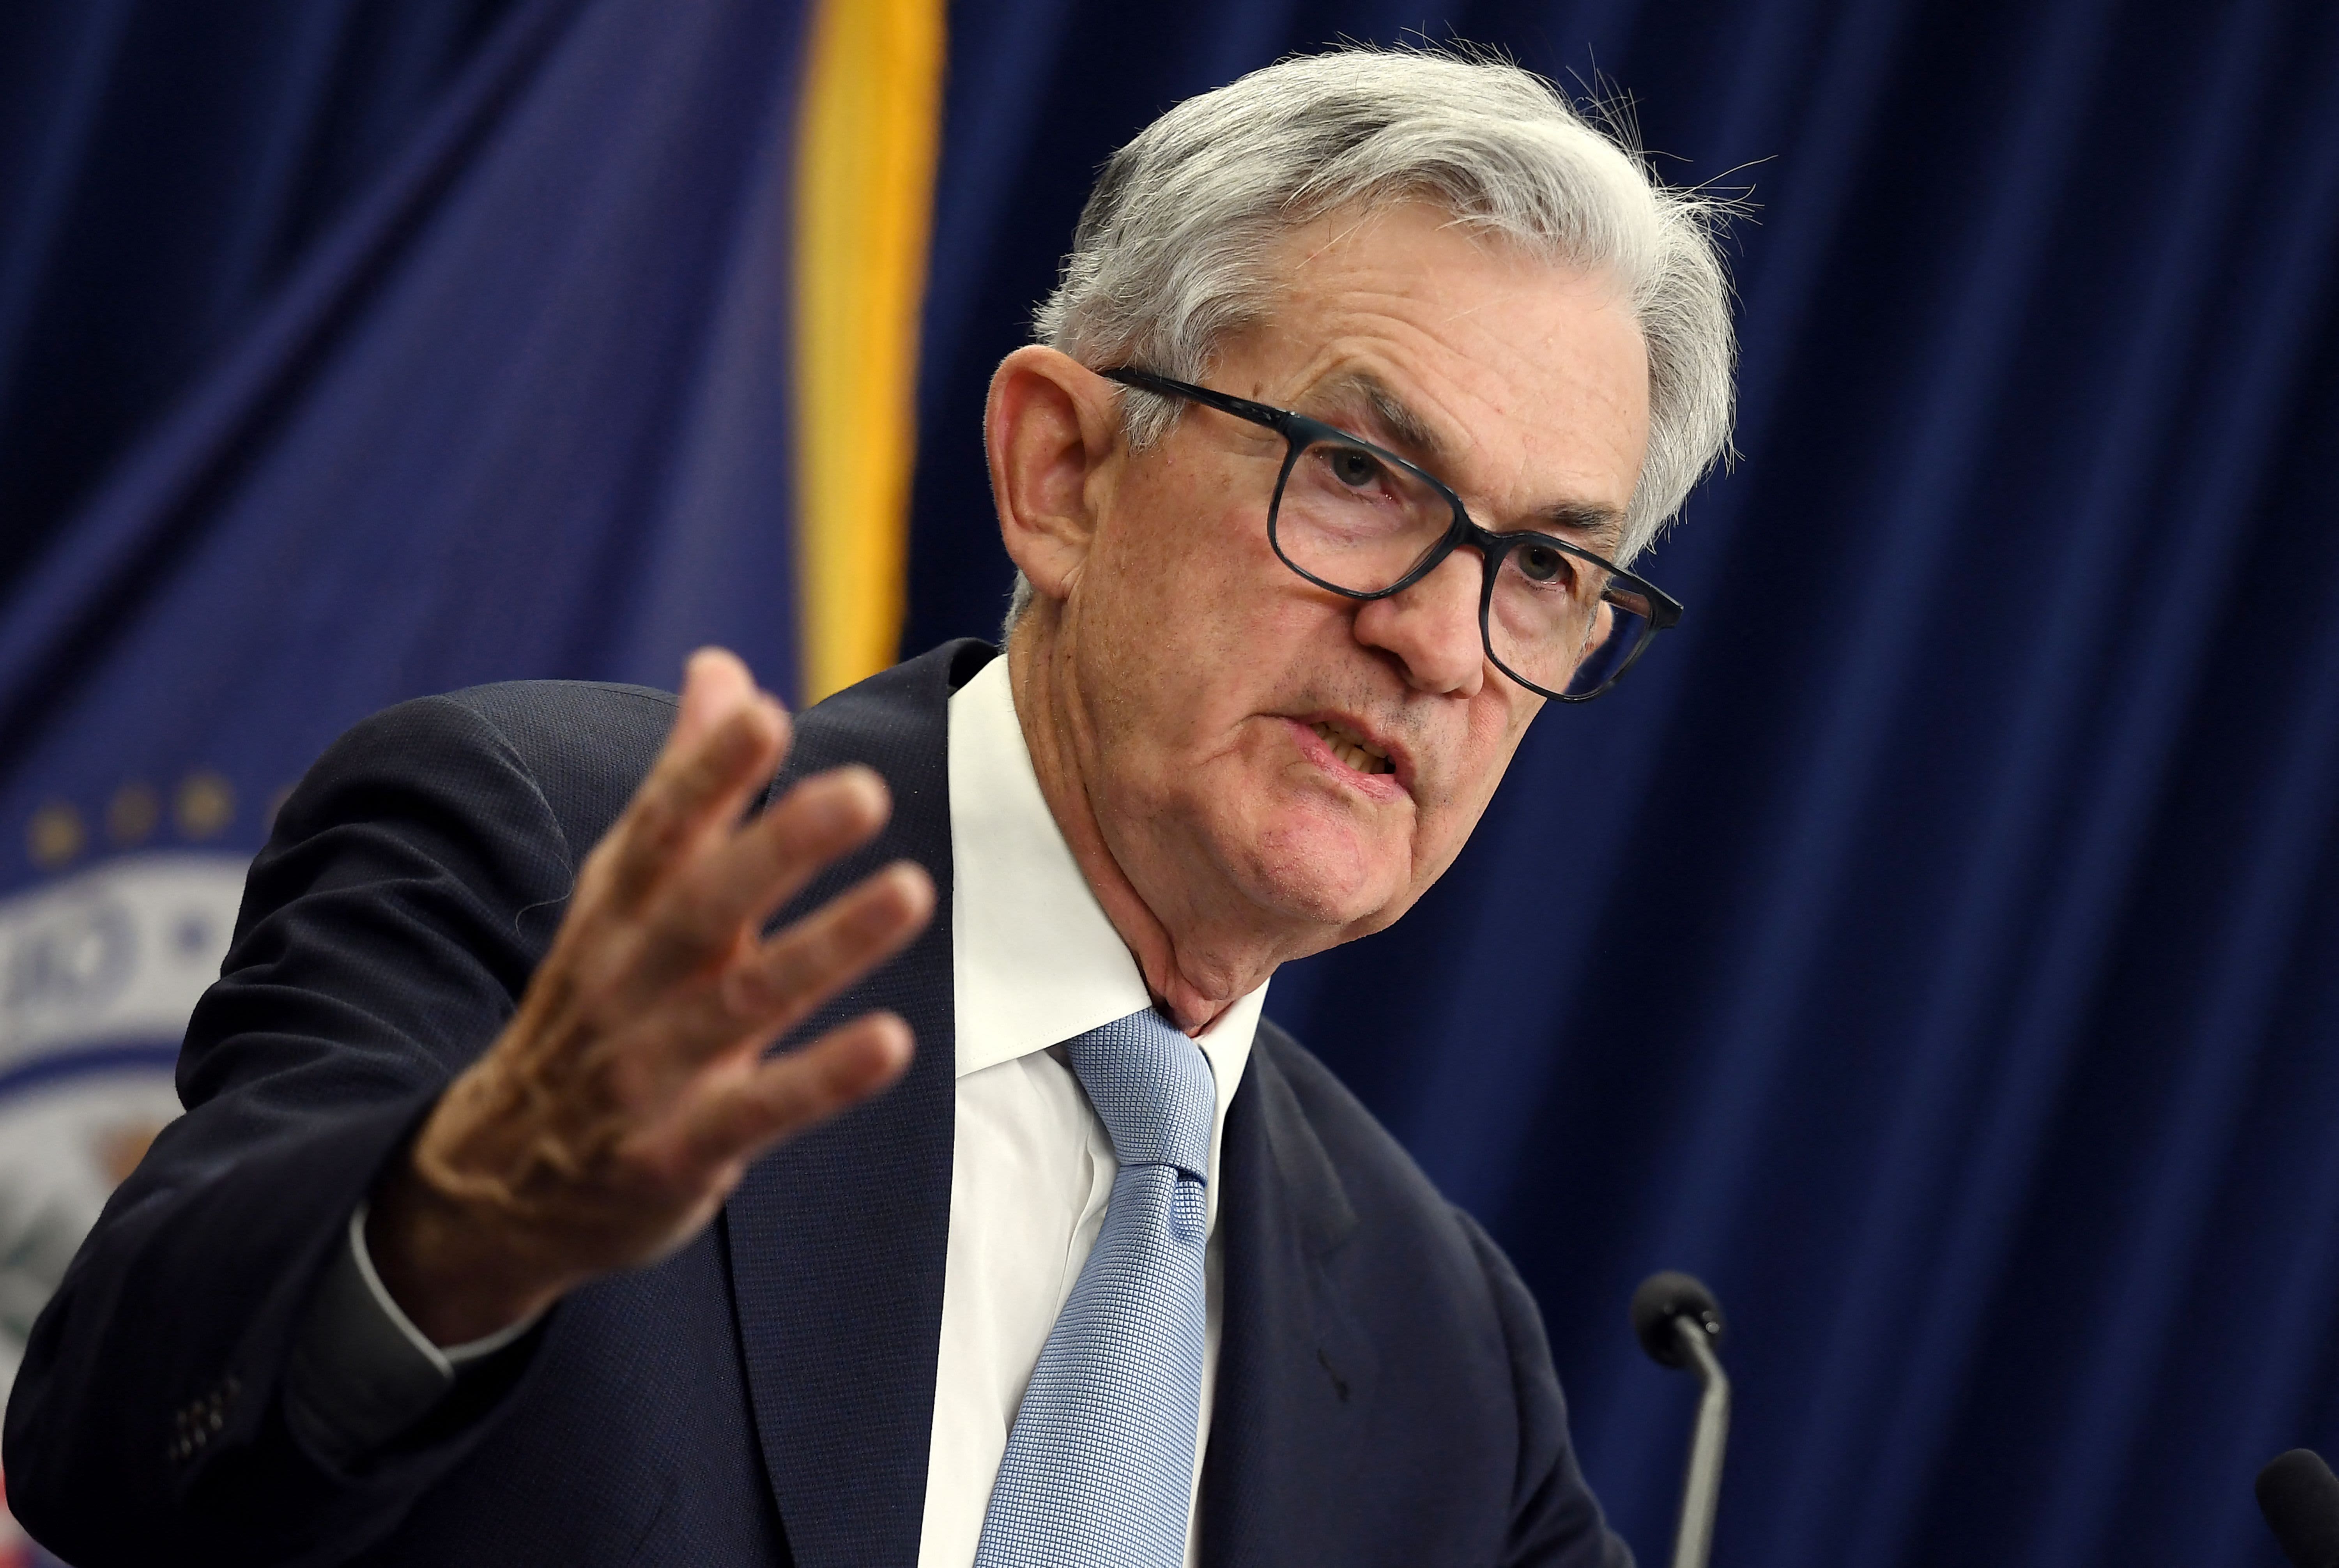 The Fed expects the banking crisis to cause a recession this year, the minutes show